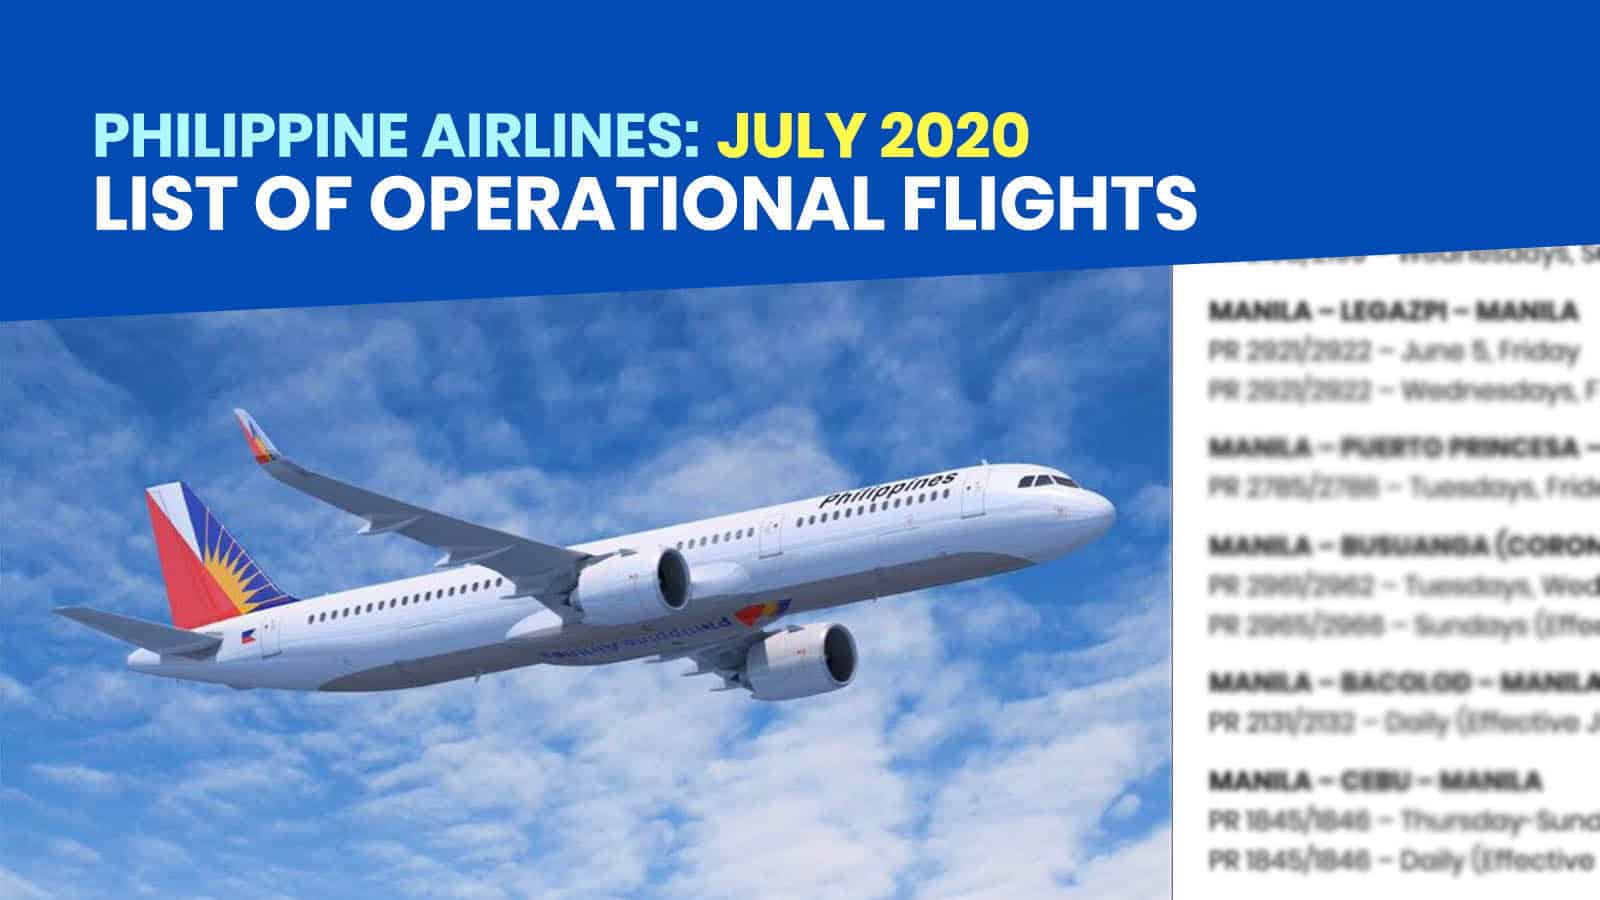 PHILIPPINE AIRLINES: List of Operational Flights for JULY 2020